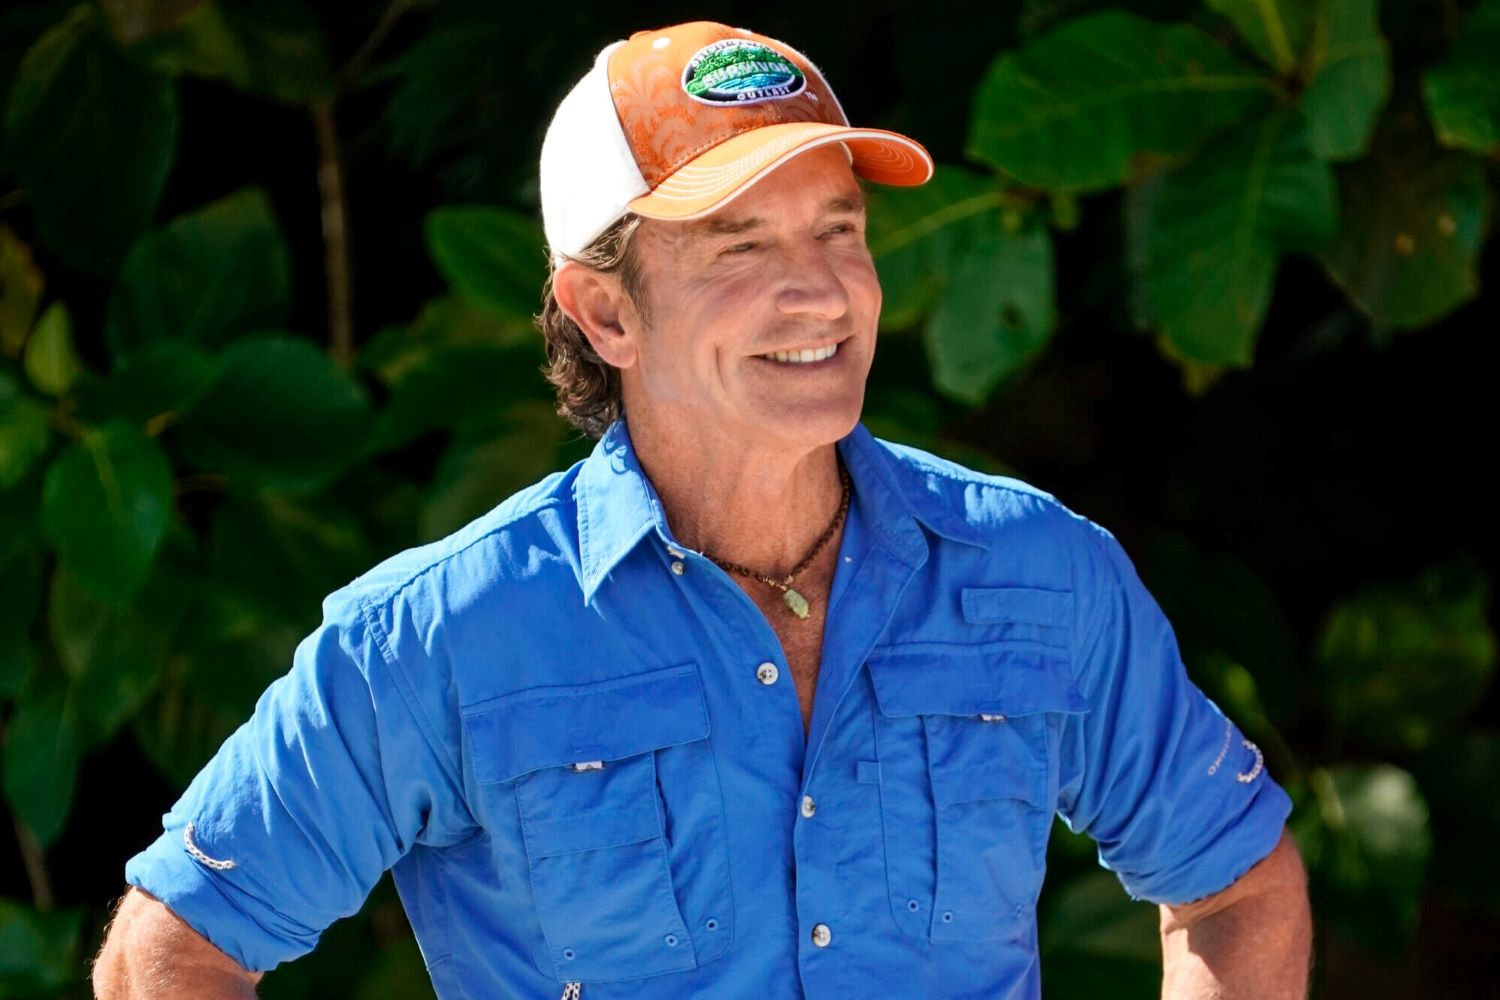 Jeff Probst, the host of 'Survivor' Season 44, which premieres tonight, March 1, wears a blue button-up shirt with rolled-up sleeves and an orange and white 'Survivor' baseball cap.